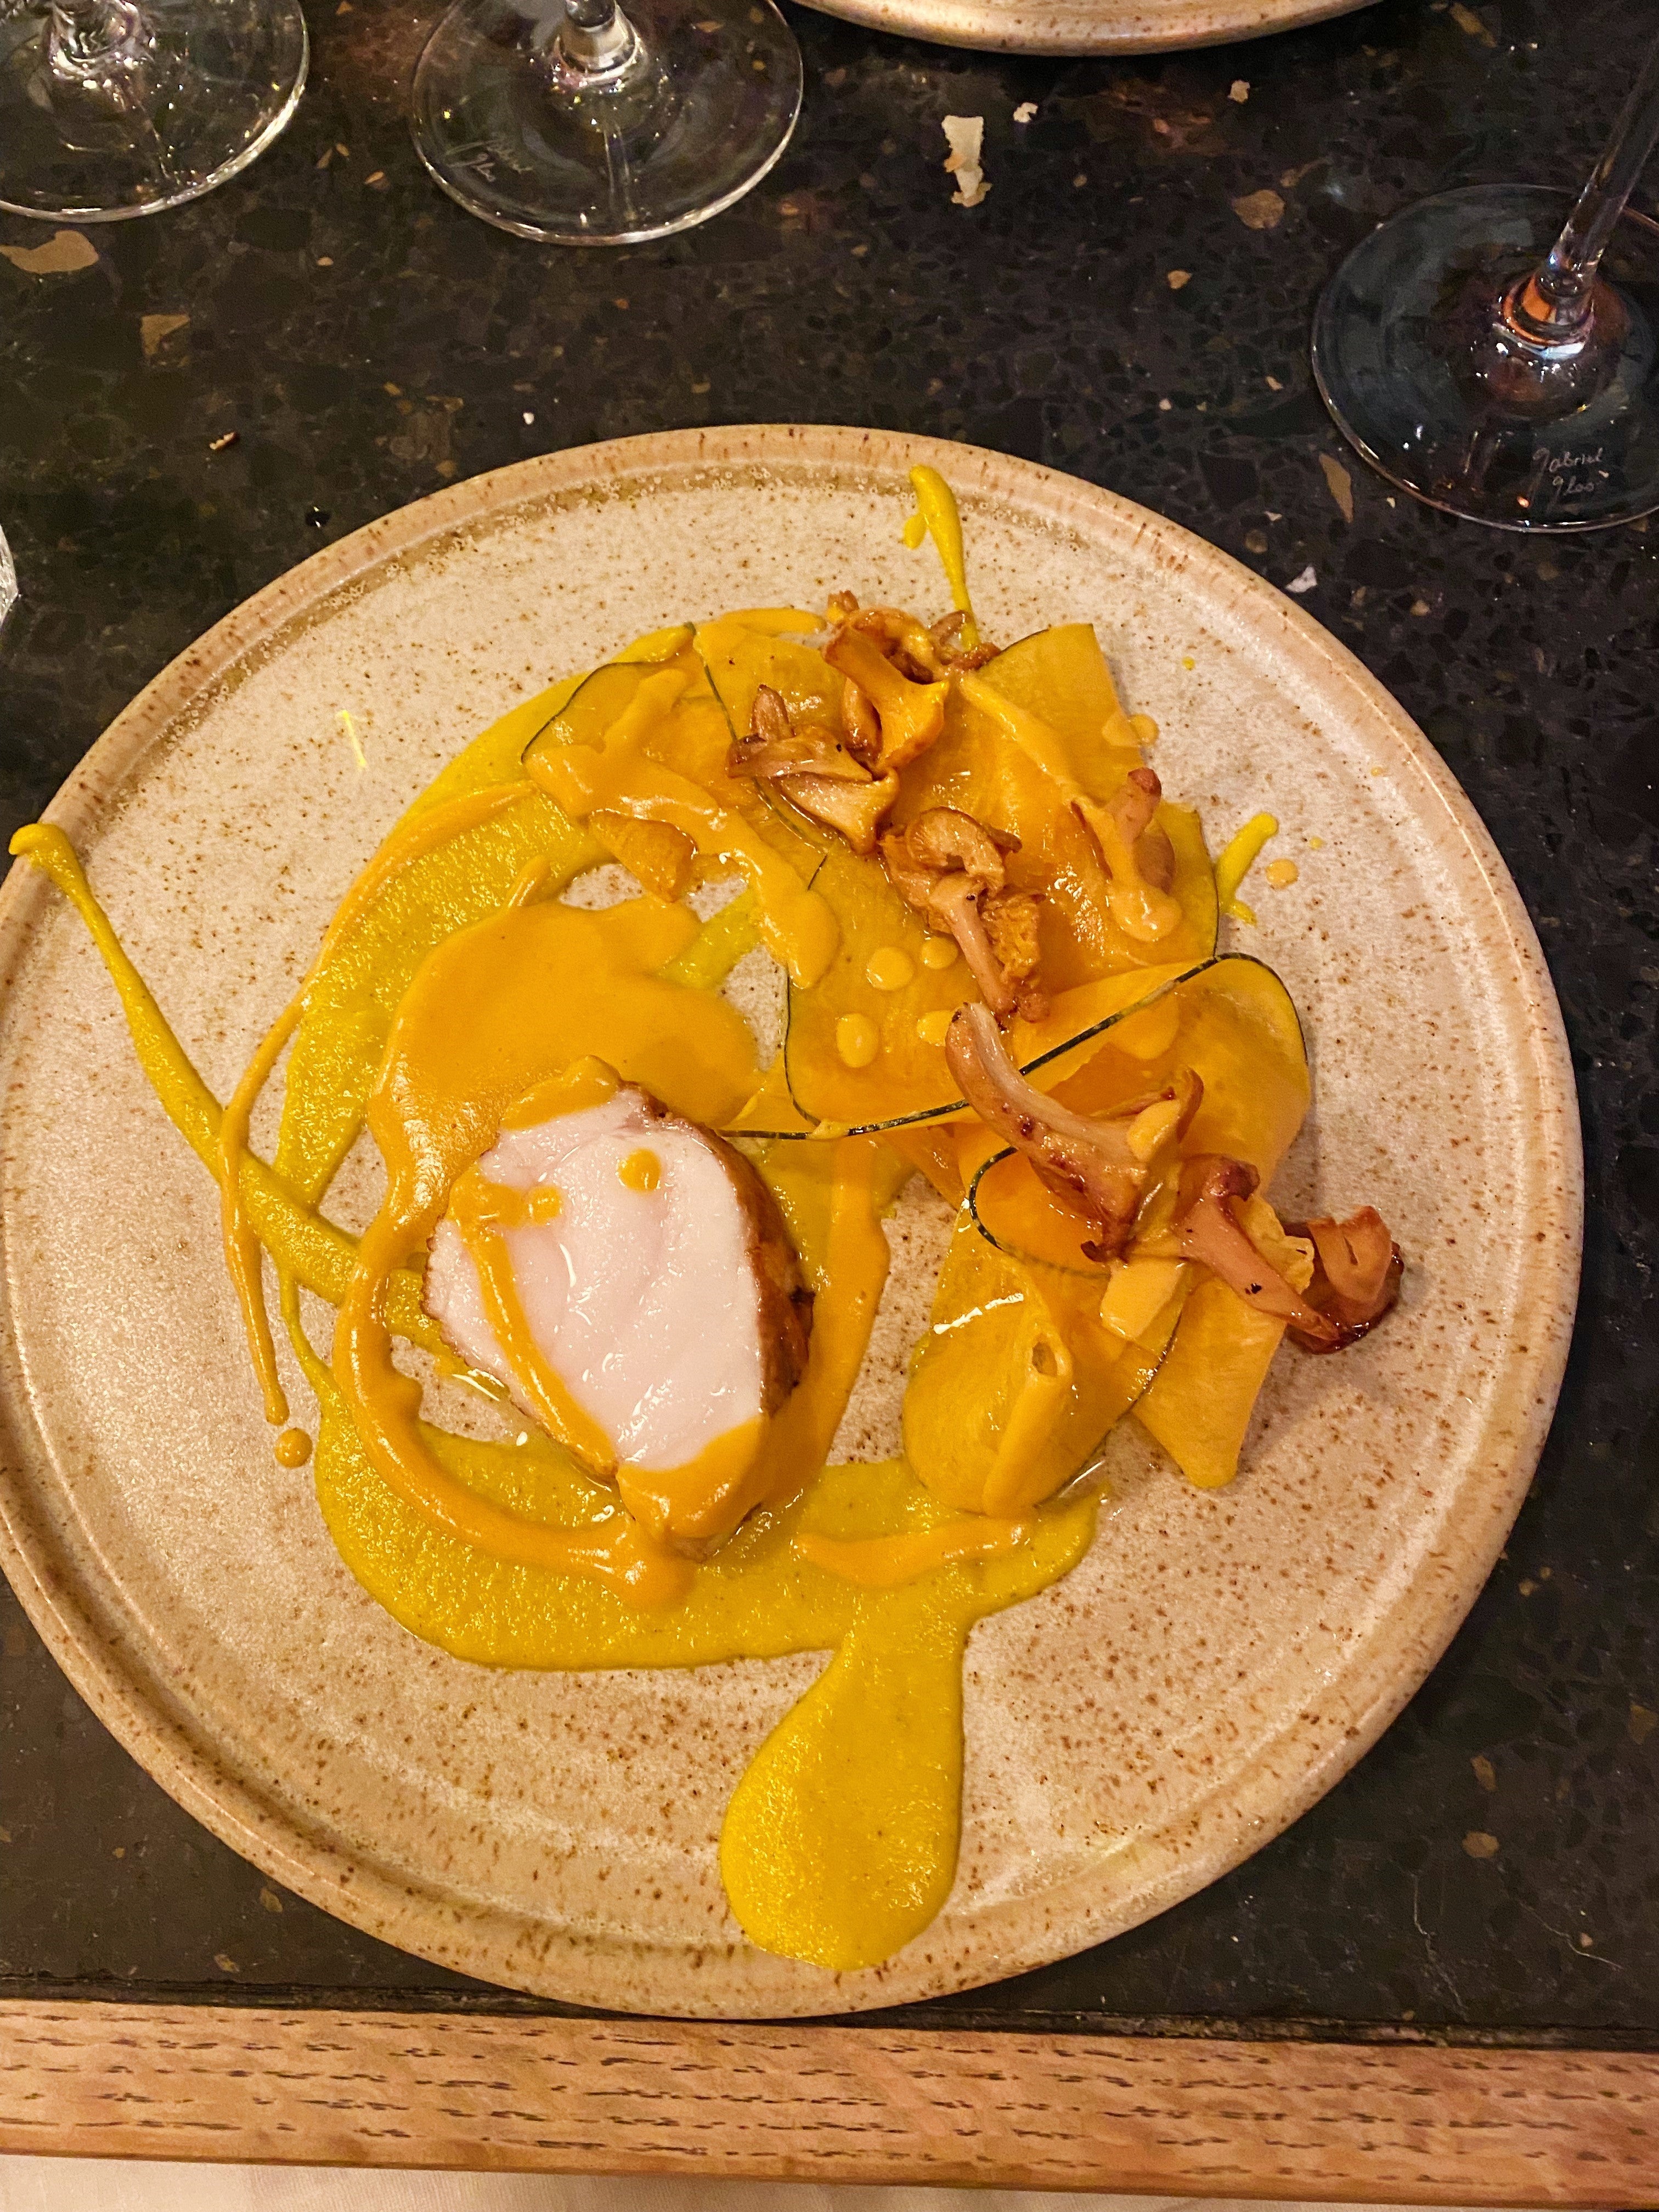 Monkfish was striking orange in colour and the exact personification of the autumn trees outside